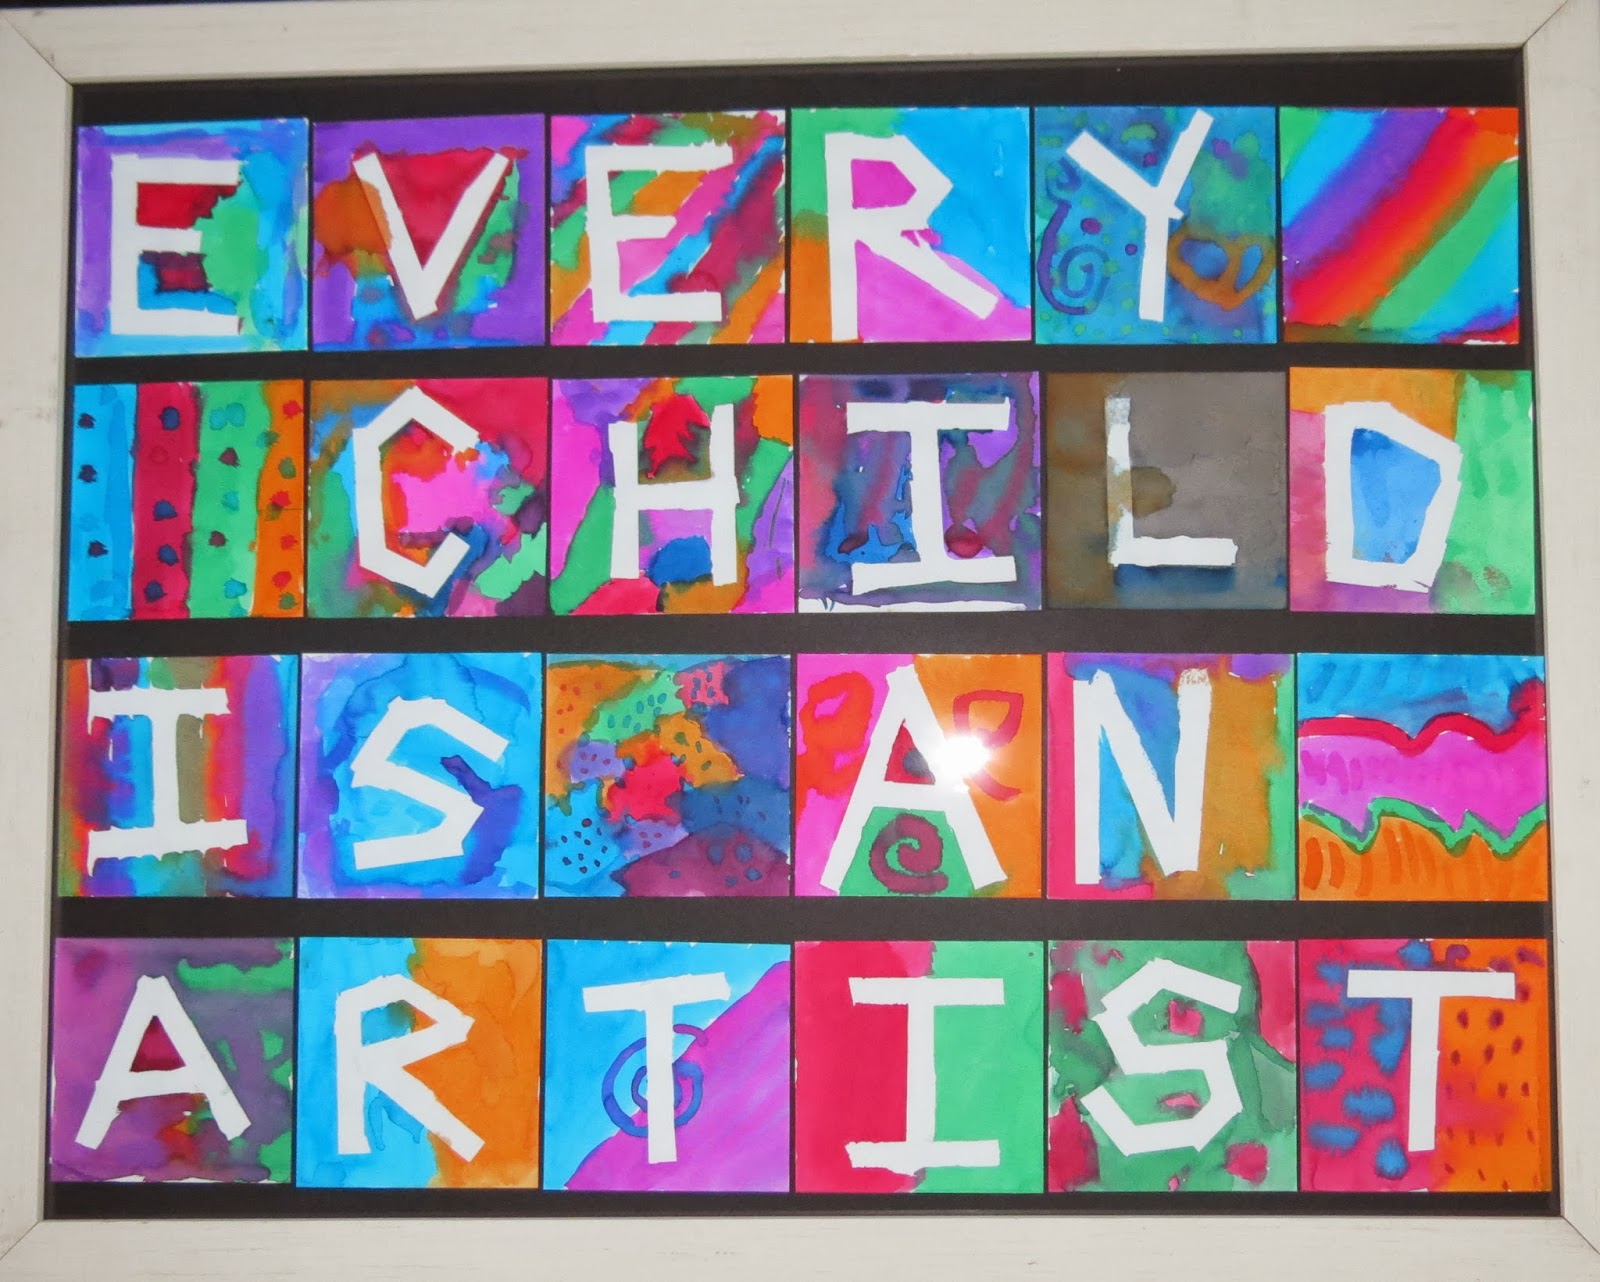 AESGATE: Now showing...Every Child is an Artist